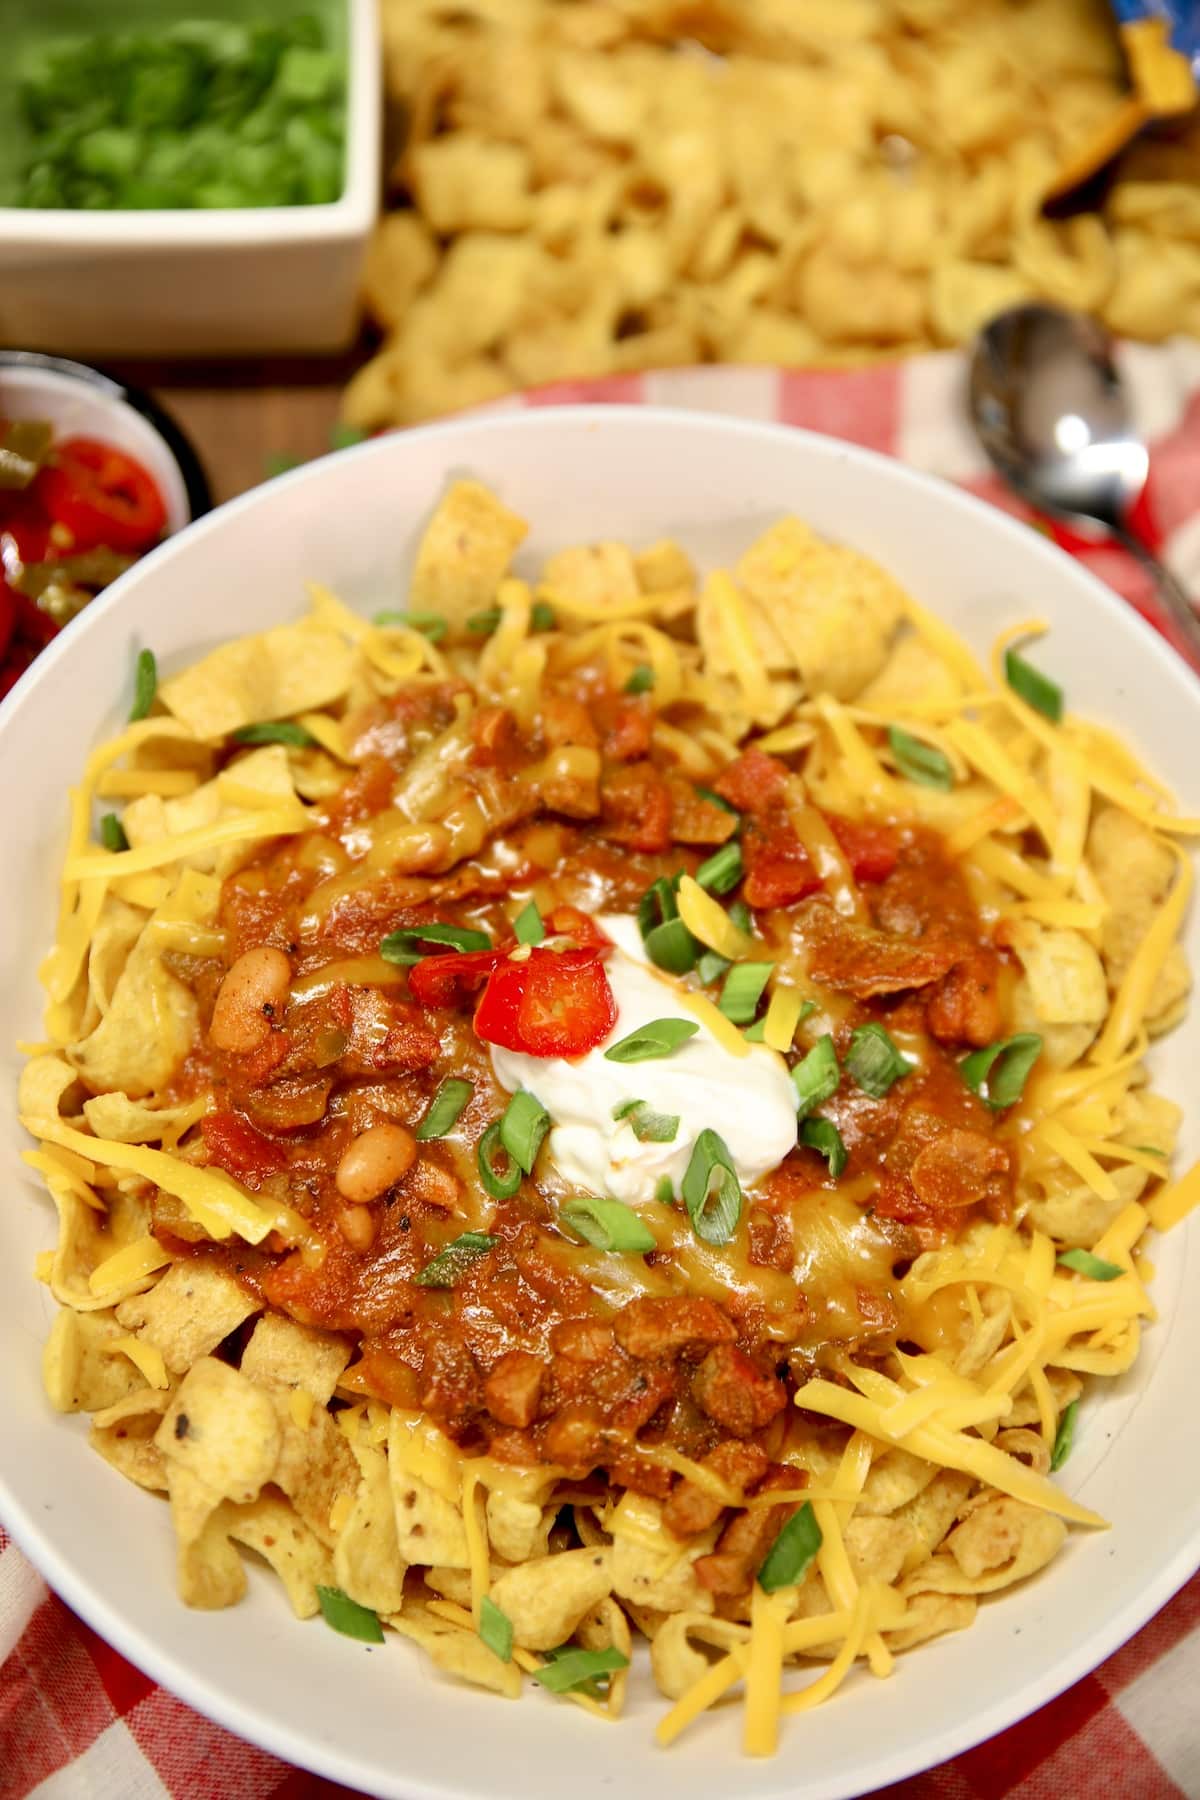 Bowl of frito chili pie with sour cream and candied jalapenos.